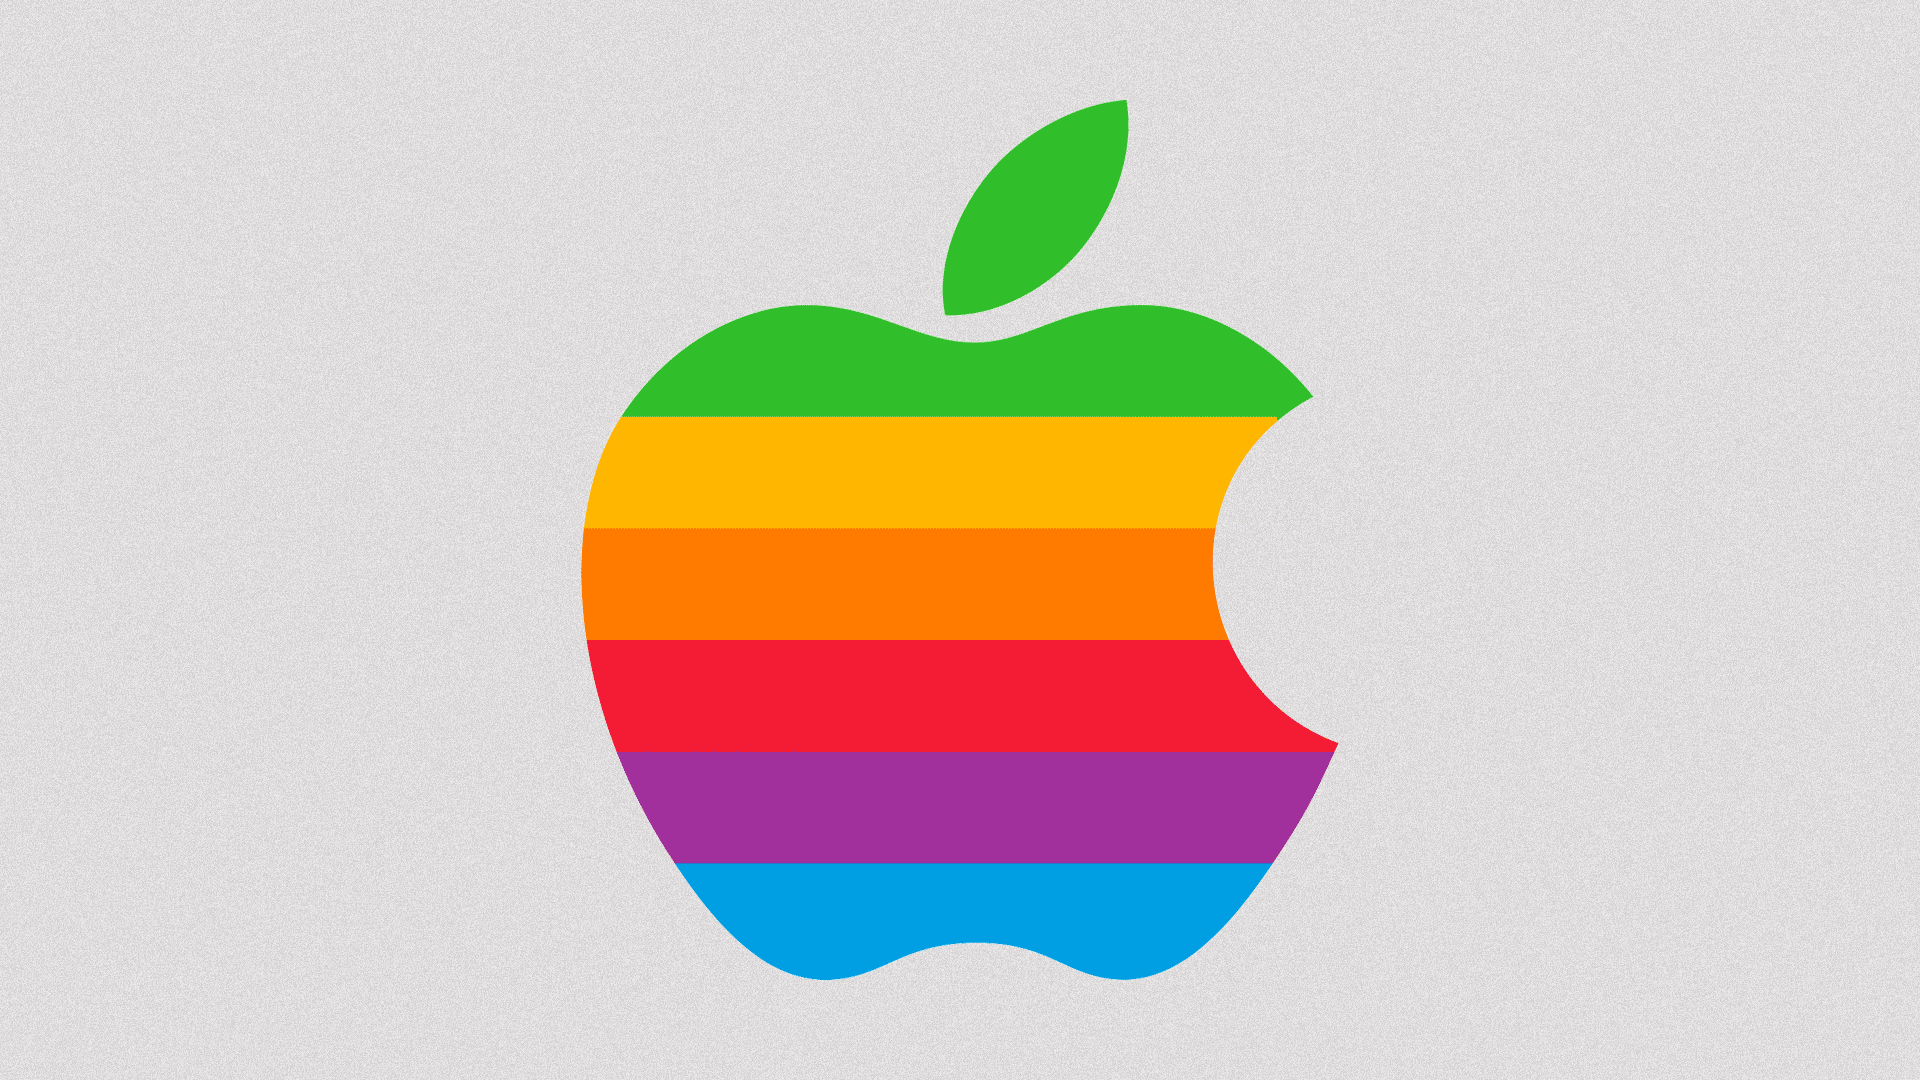 An animated graphic of the Apple logo with bites being taken out